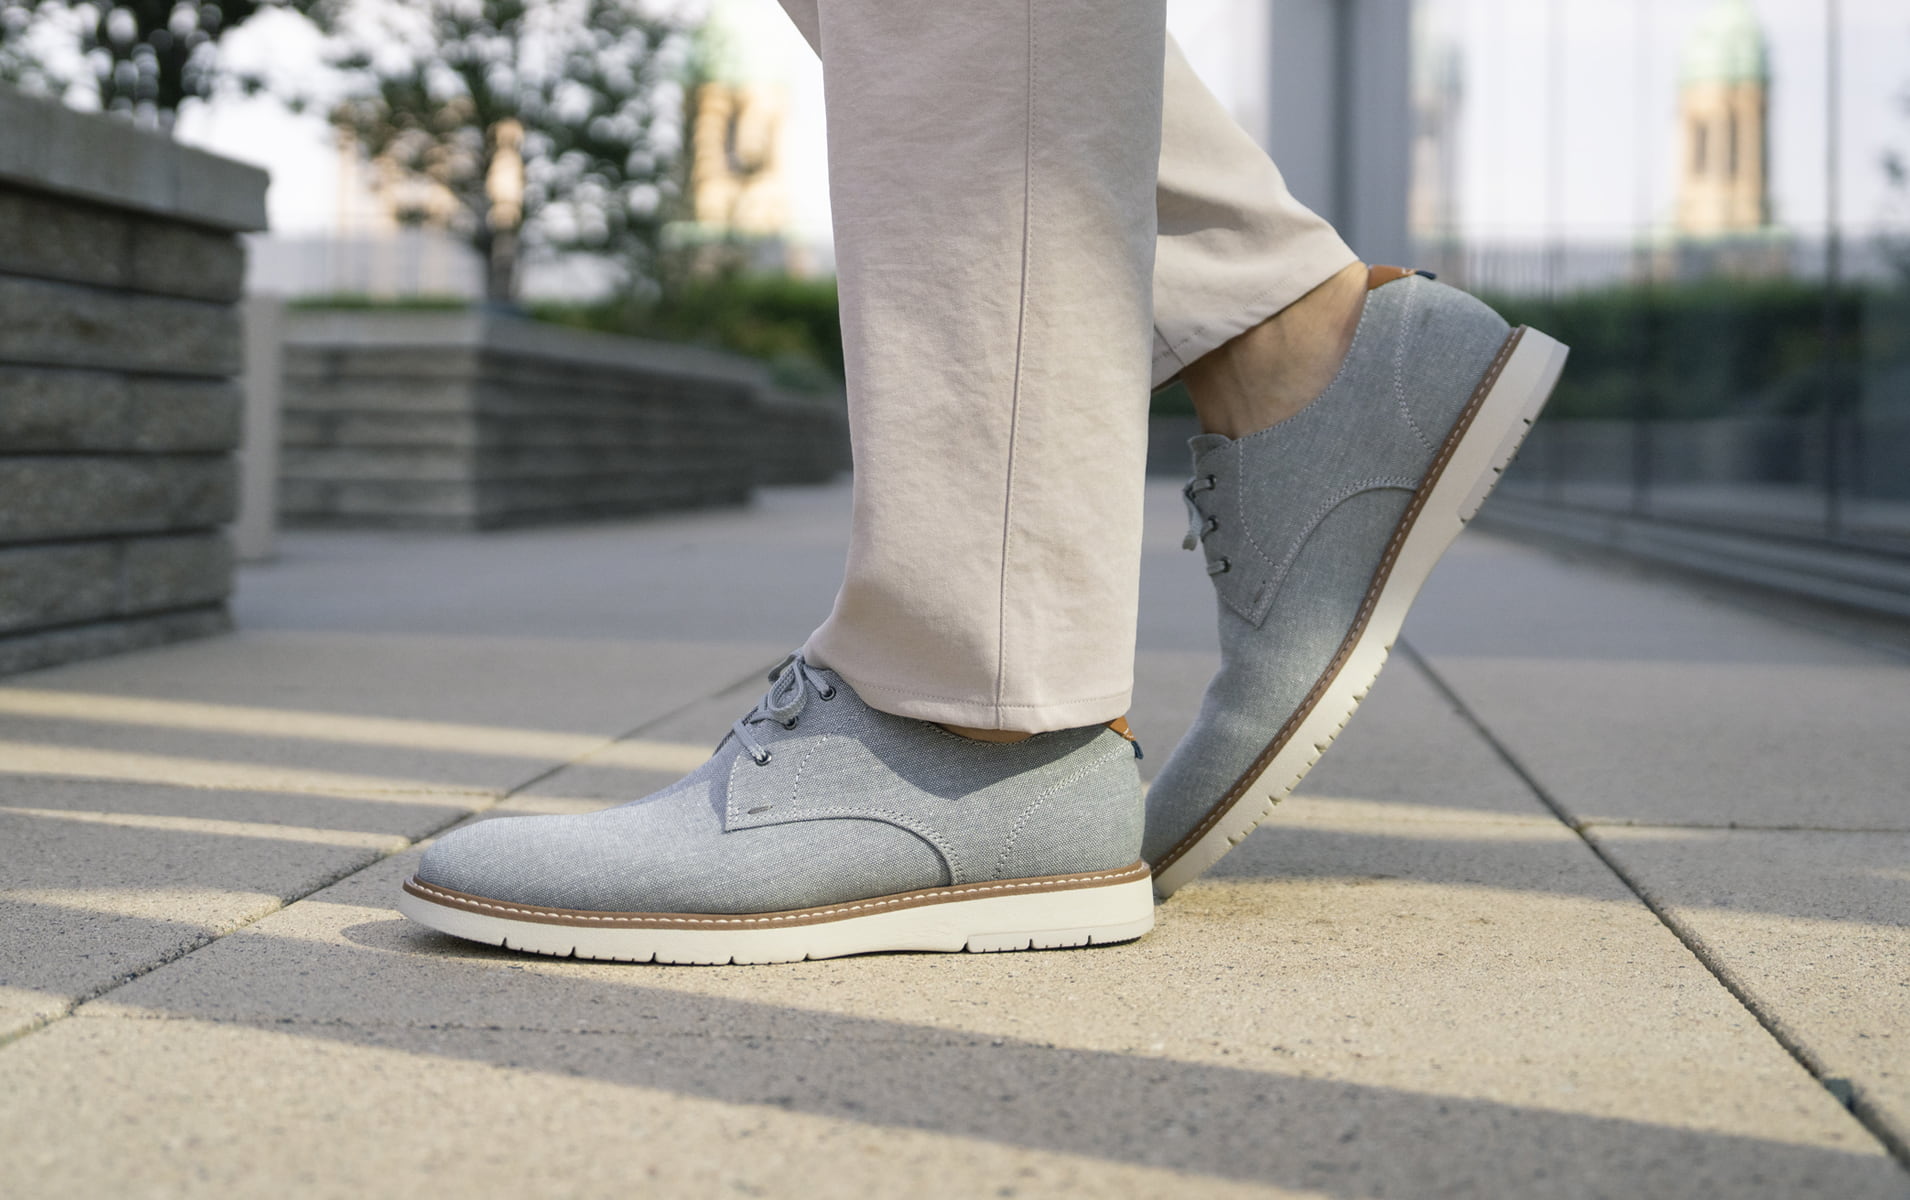 Click to shop Florsheim casuals. Image features the Vibe canvas in grey.